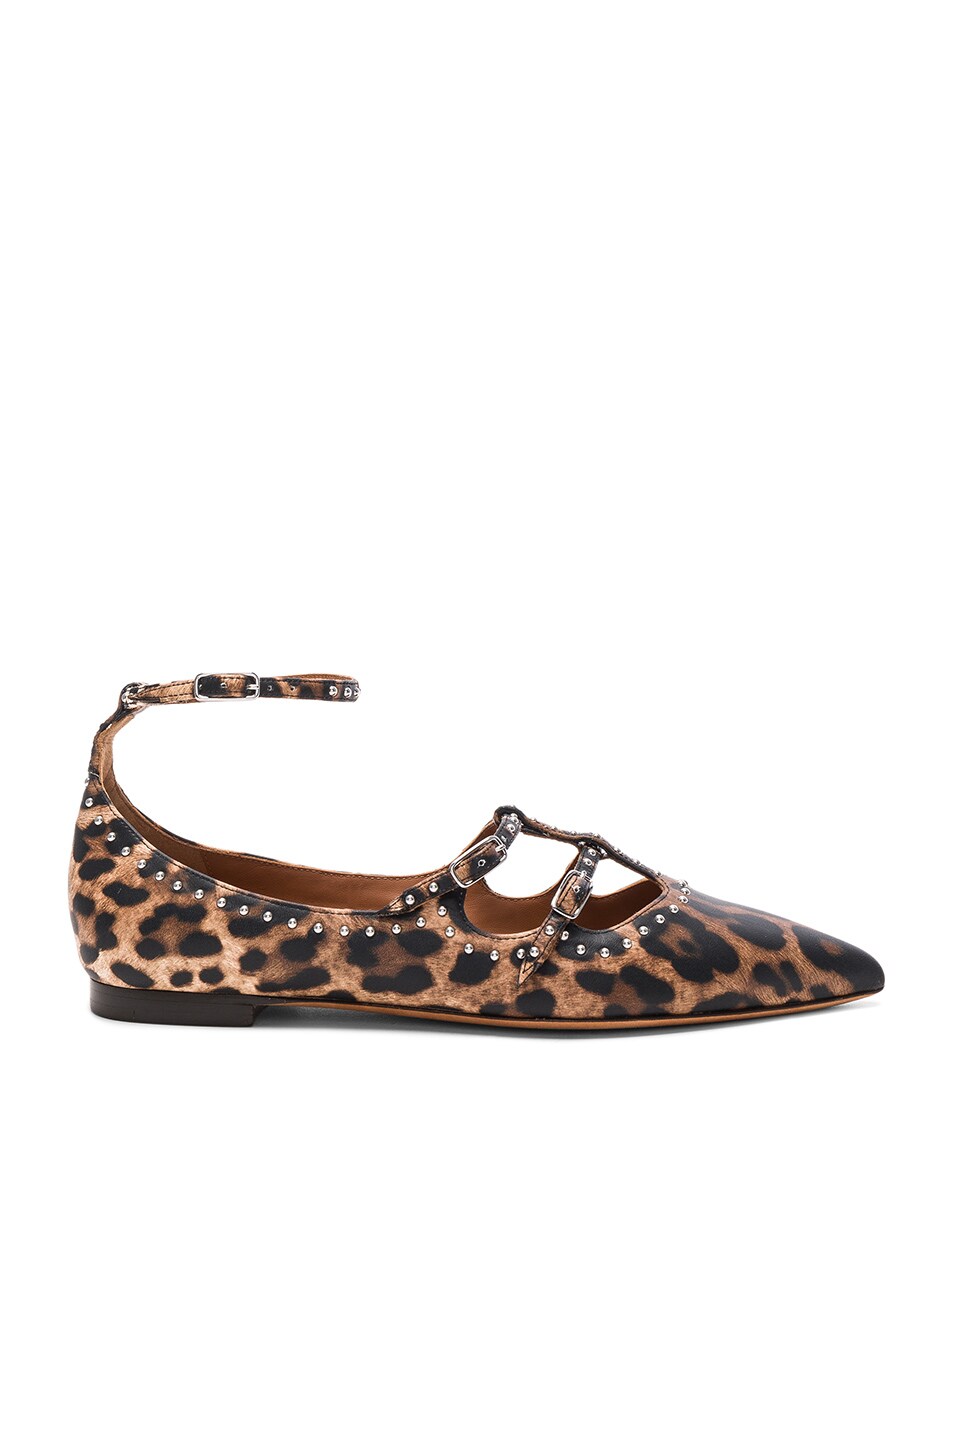 Image 1 of Givenchy Piper Leopard Print Leather Ballerina Flats in Multi